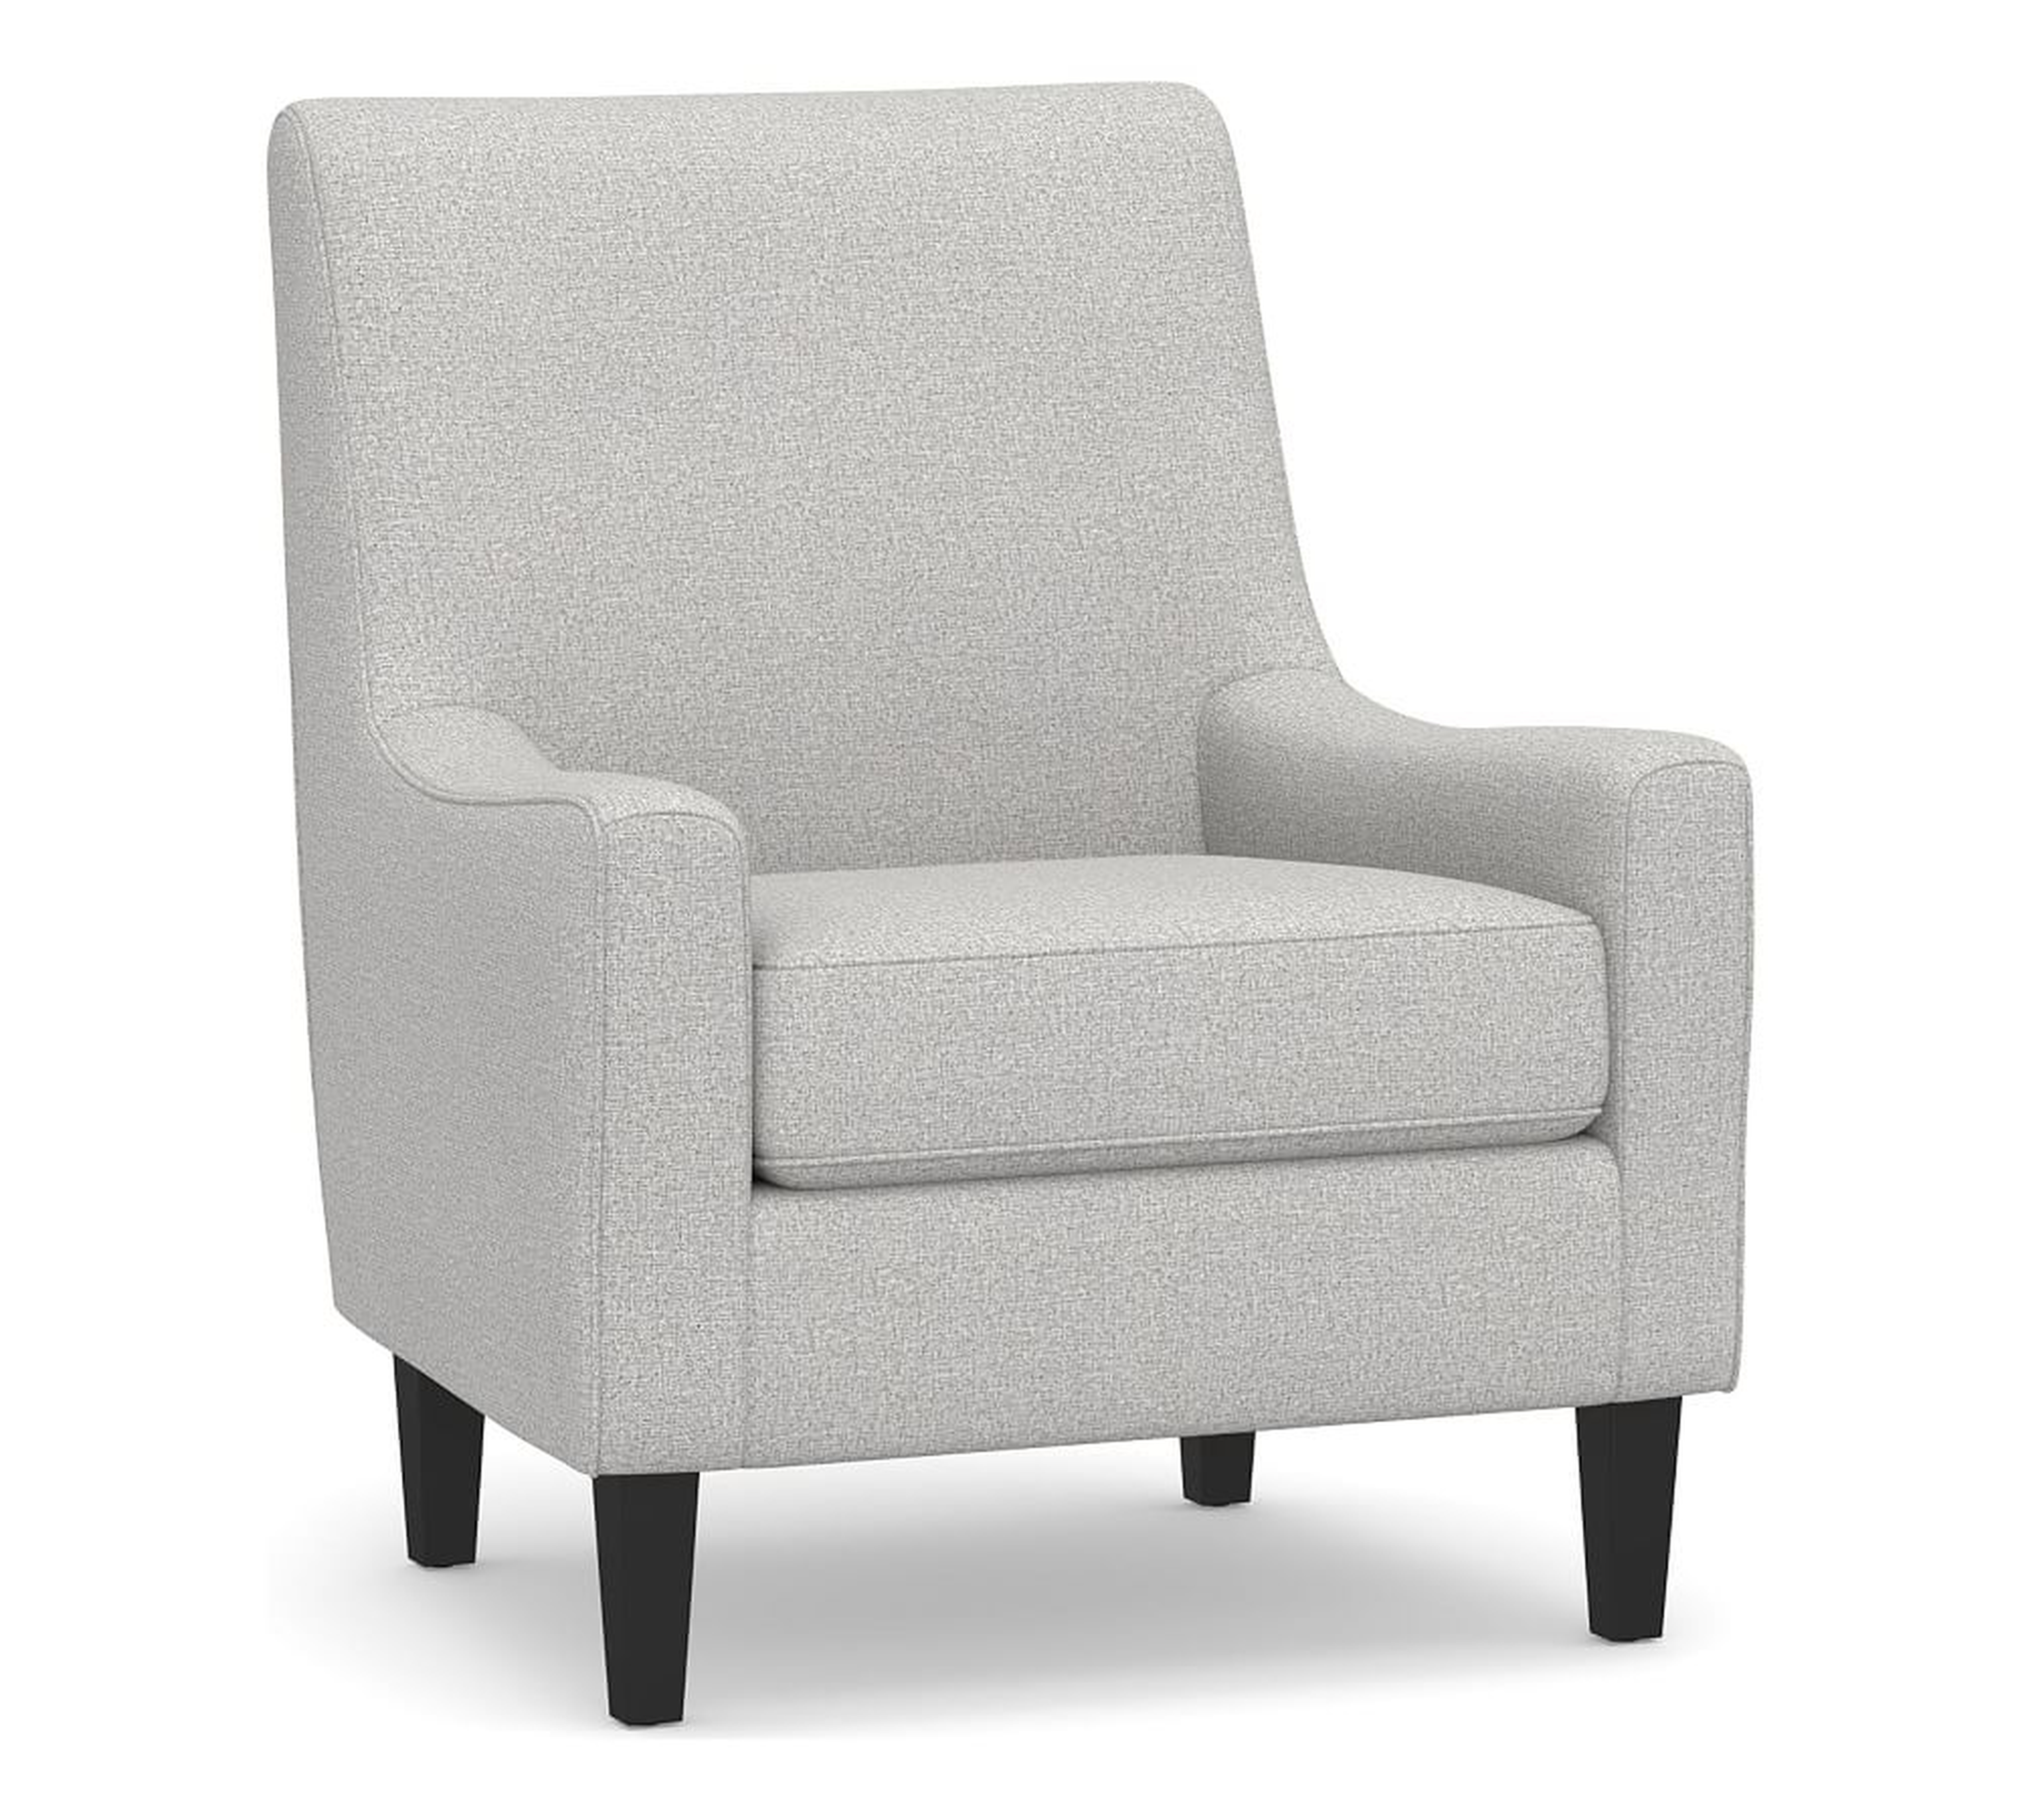 SoMa Isaac Upholstered Armchair, Polyester Wrapped Cushions, Park Weave Ash - Pottery Barn